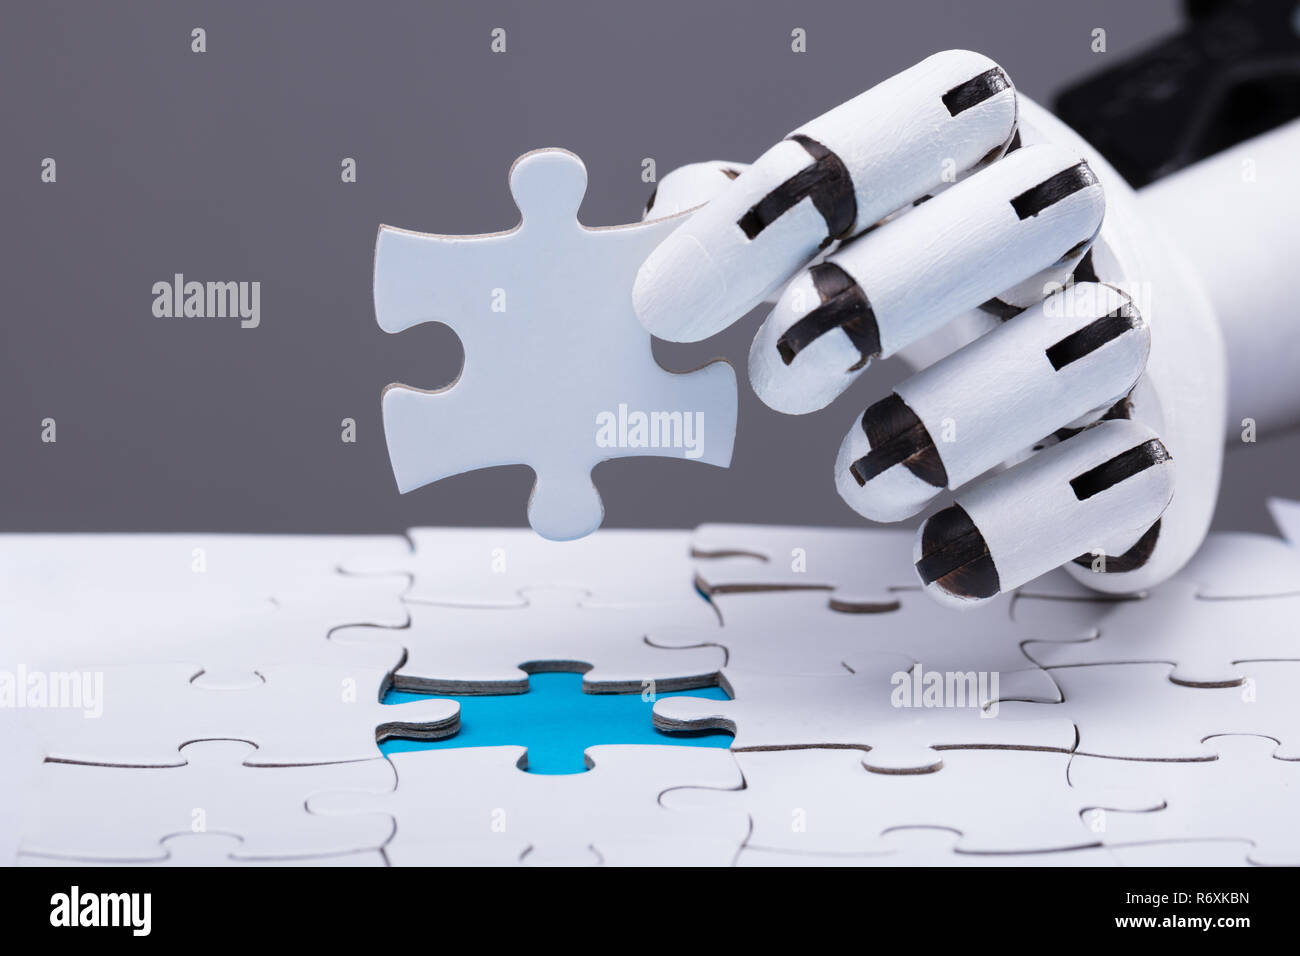 Robot Solving Jigsaw Puzzle Stock Photo